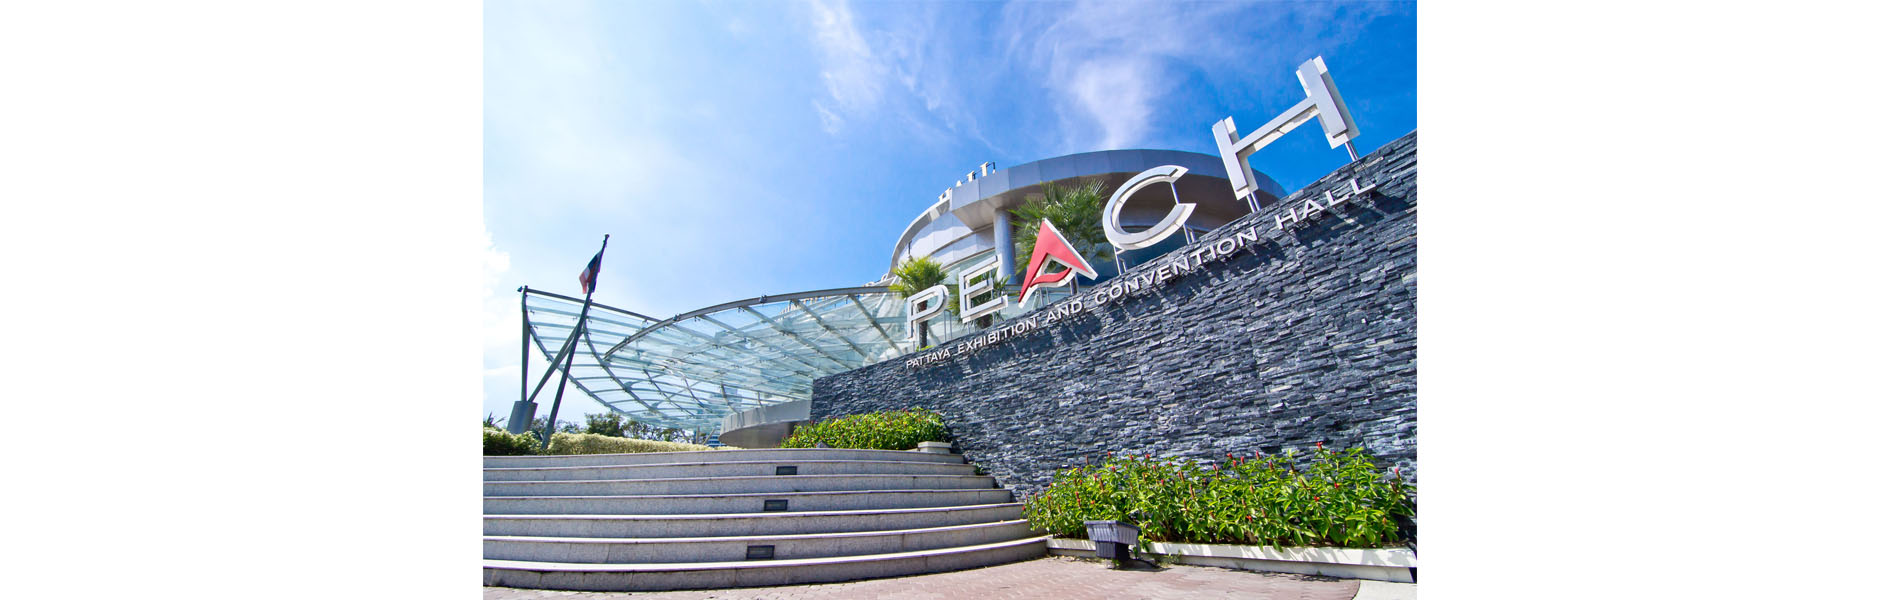 PATTAYA EXHIBITION AND CONVENTION HALL (PEACH)/PATTAYA EXHIBITION AND CONVENTION HALL (PEACH)